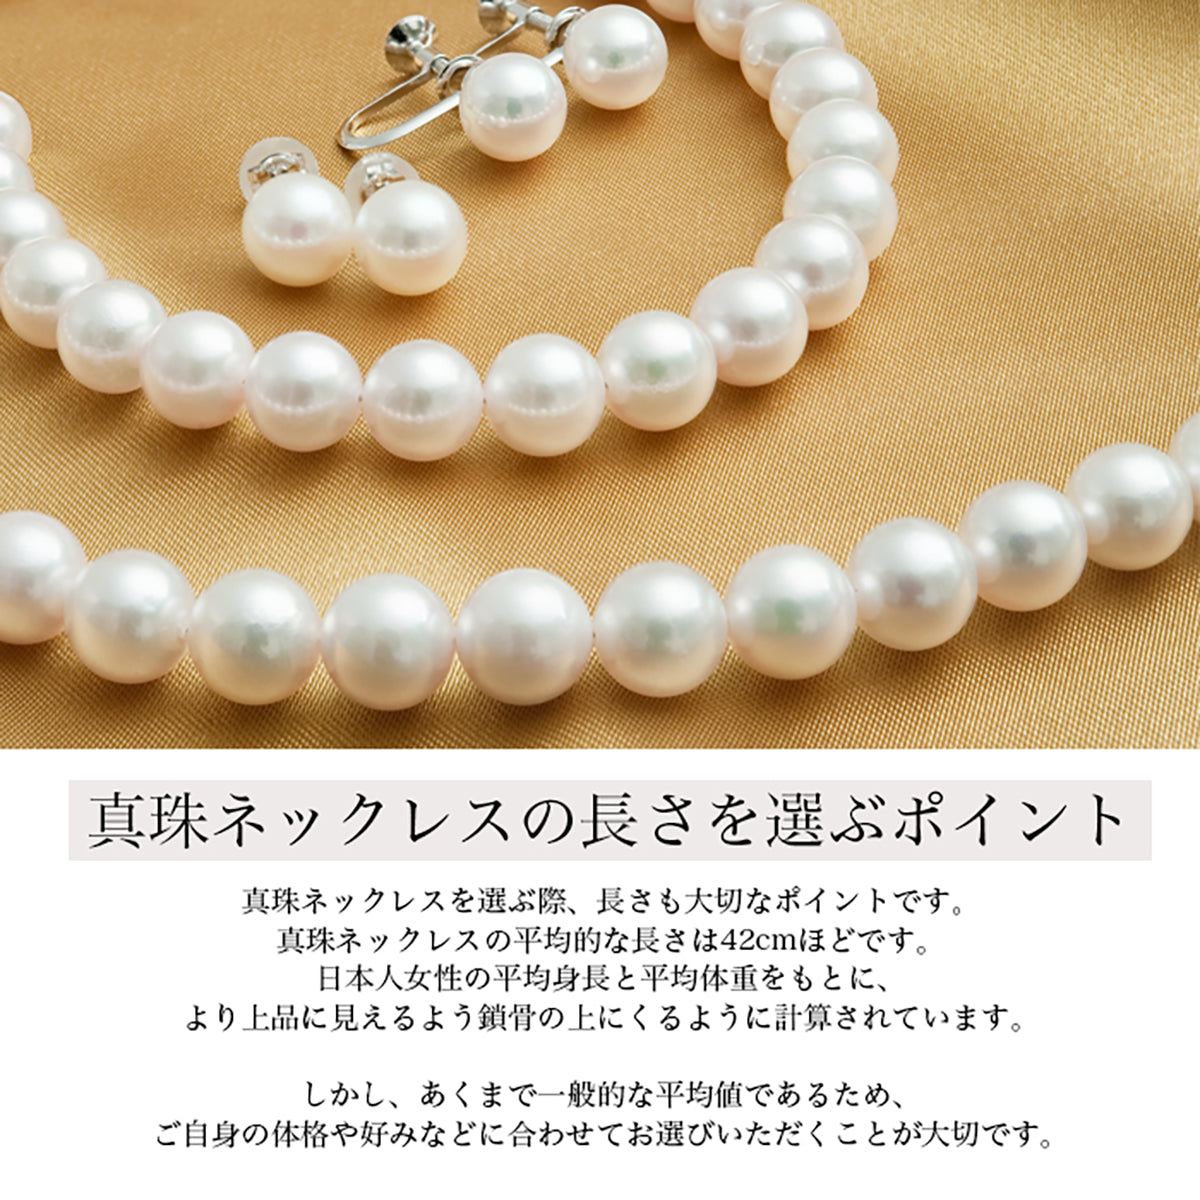 [Natural White] Uncolored Akoya Pearl Formal Necklace Set of 2 [8.0-8.5mm] (Earrings/Earrings) Certificate of Authenticity Storage Case Included Ceremonies